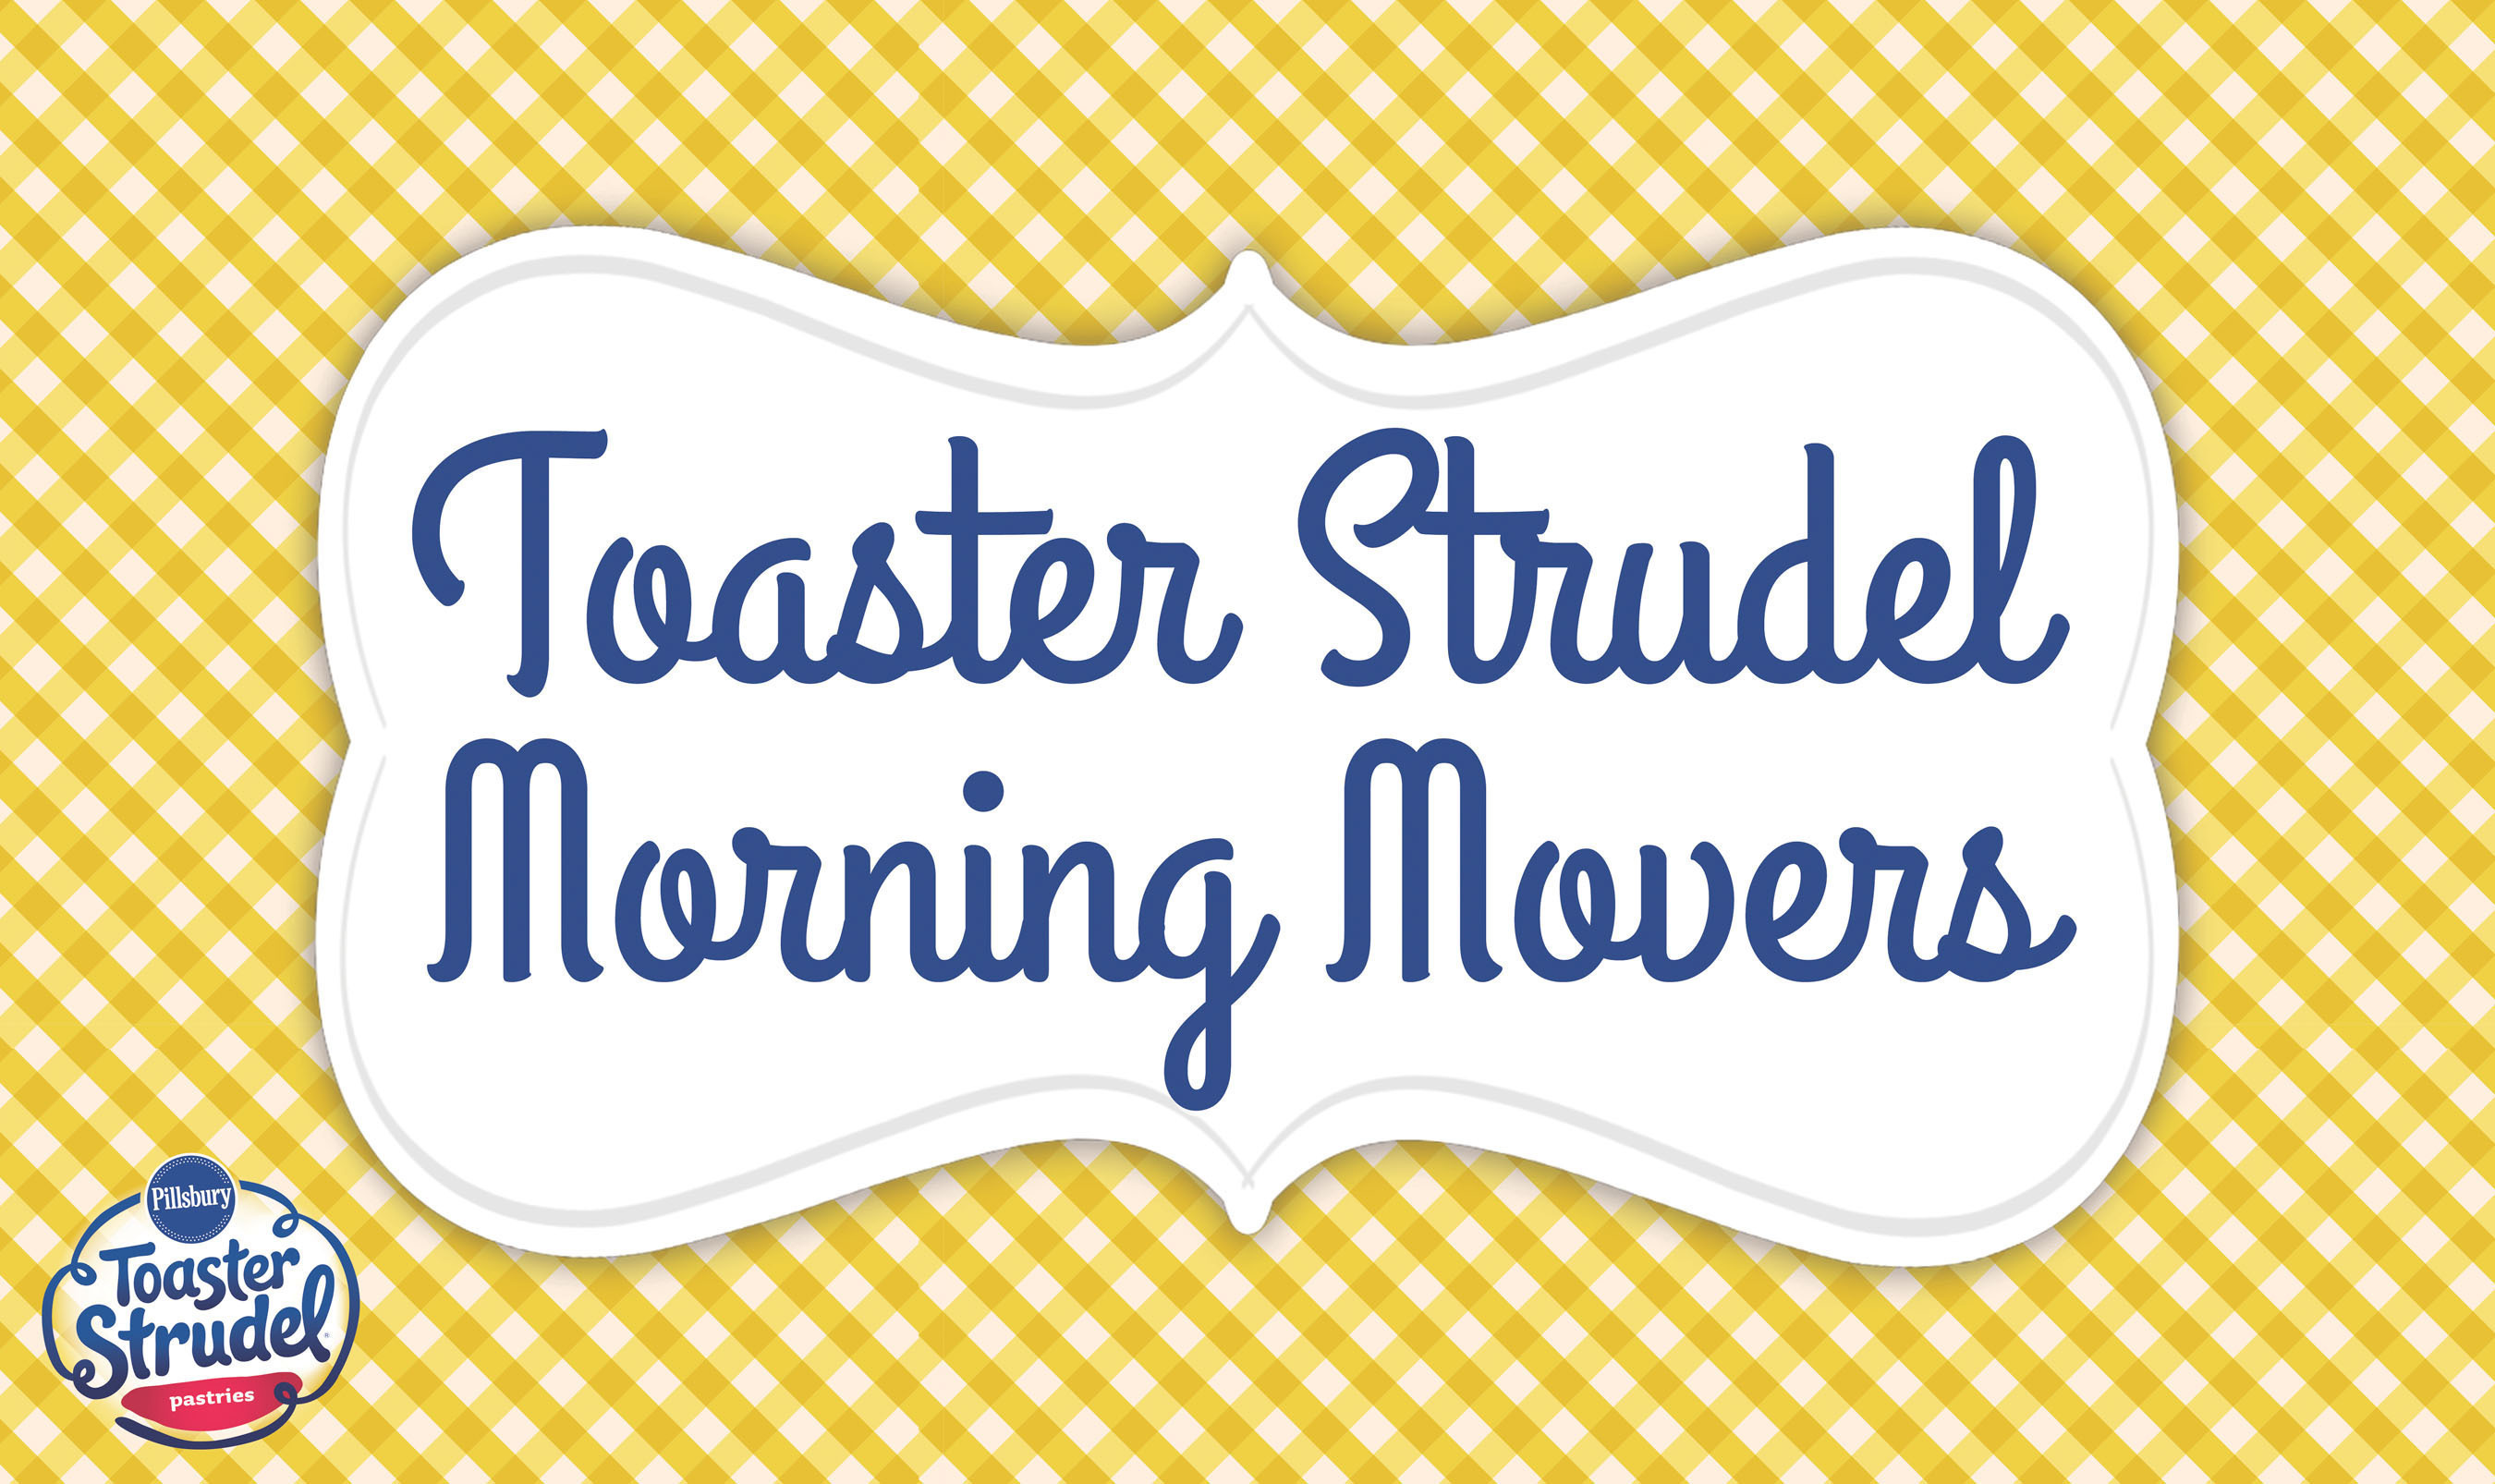 Pillsbury Toaster Strudel gets fans up & out of bed by making select morning wishes a reality at www.facebook.com/toasterstrudel under the "Morning Movers" tab. (PRNewsFoto/Pillsbury Toaster Strudel) (PRNewsFoto/PILLSBURY TOASTER STRUDEL)